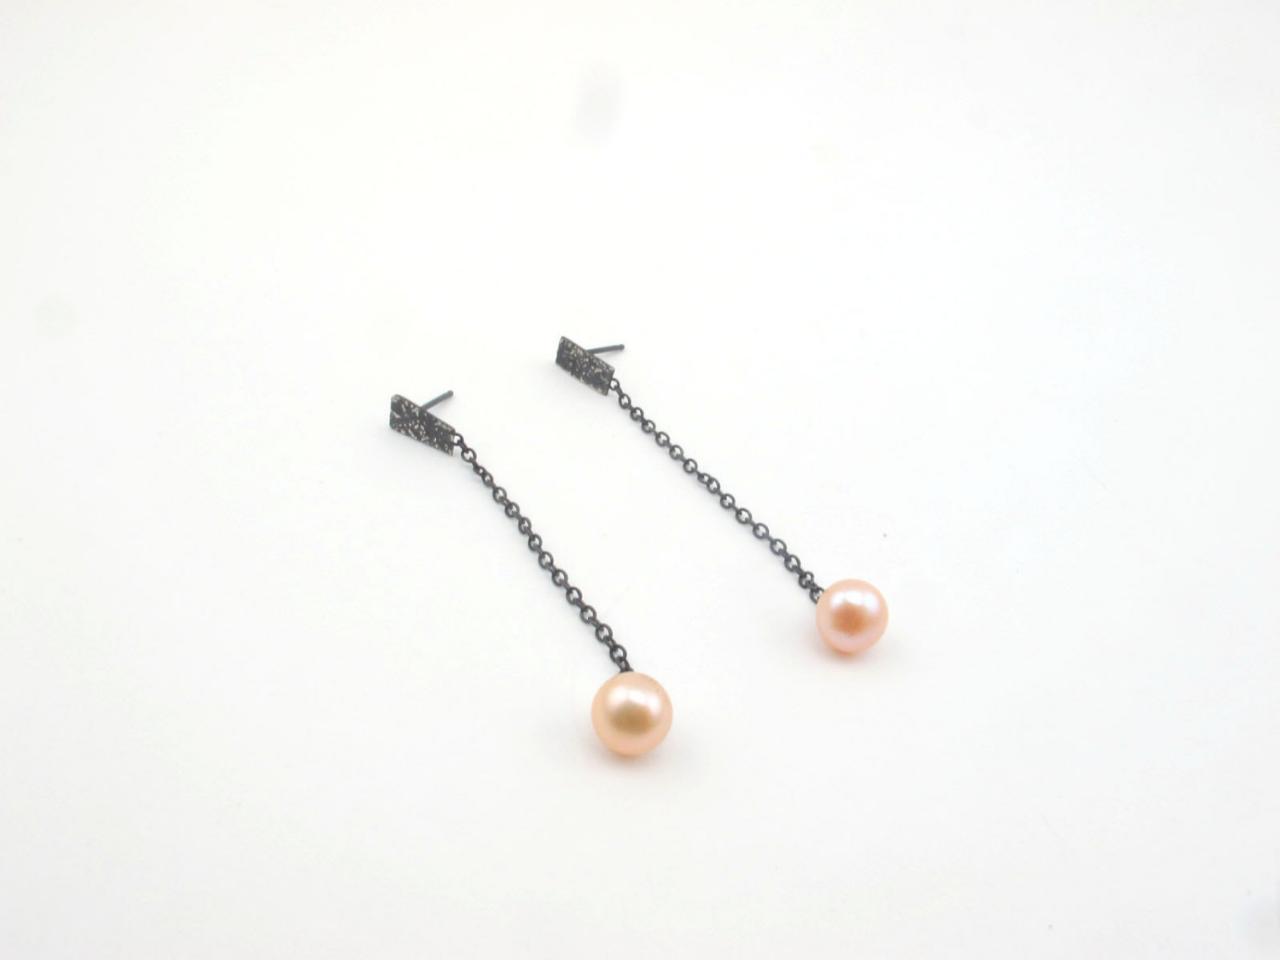 Organico-pink Pearl And Sterling Silver Dangle Earrings